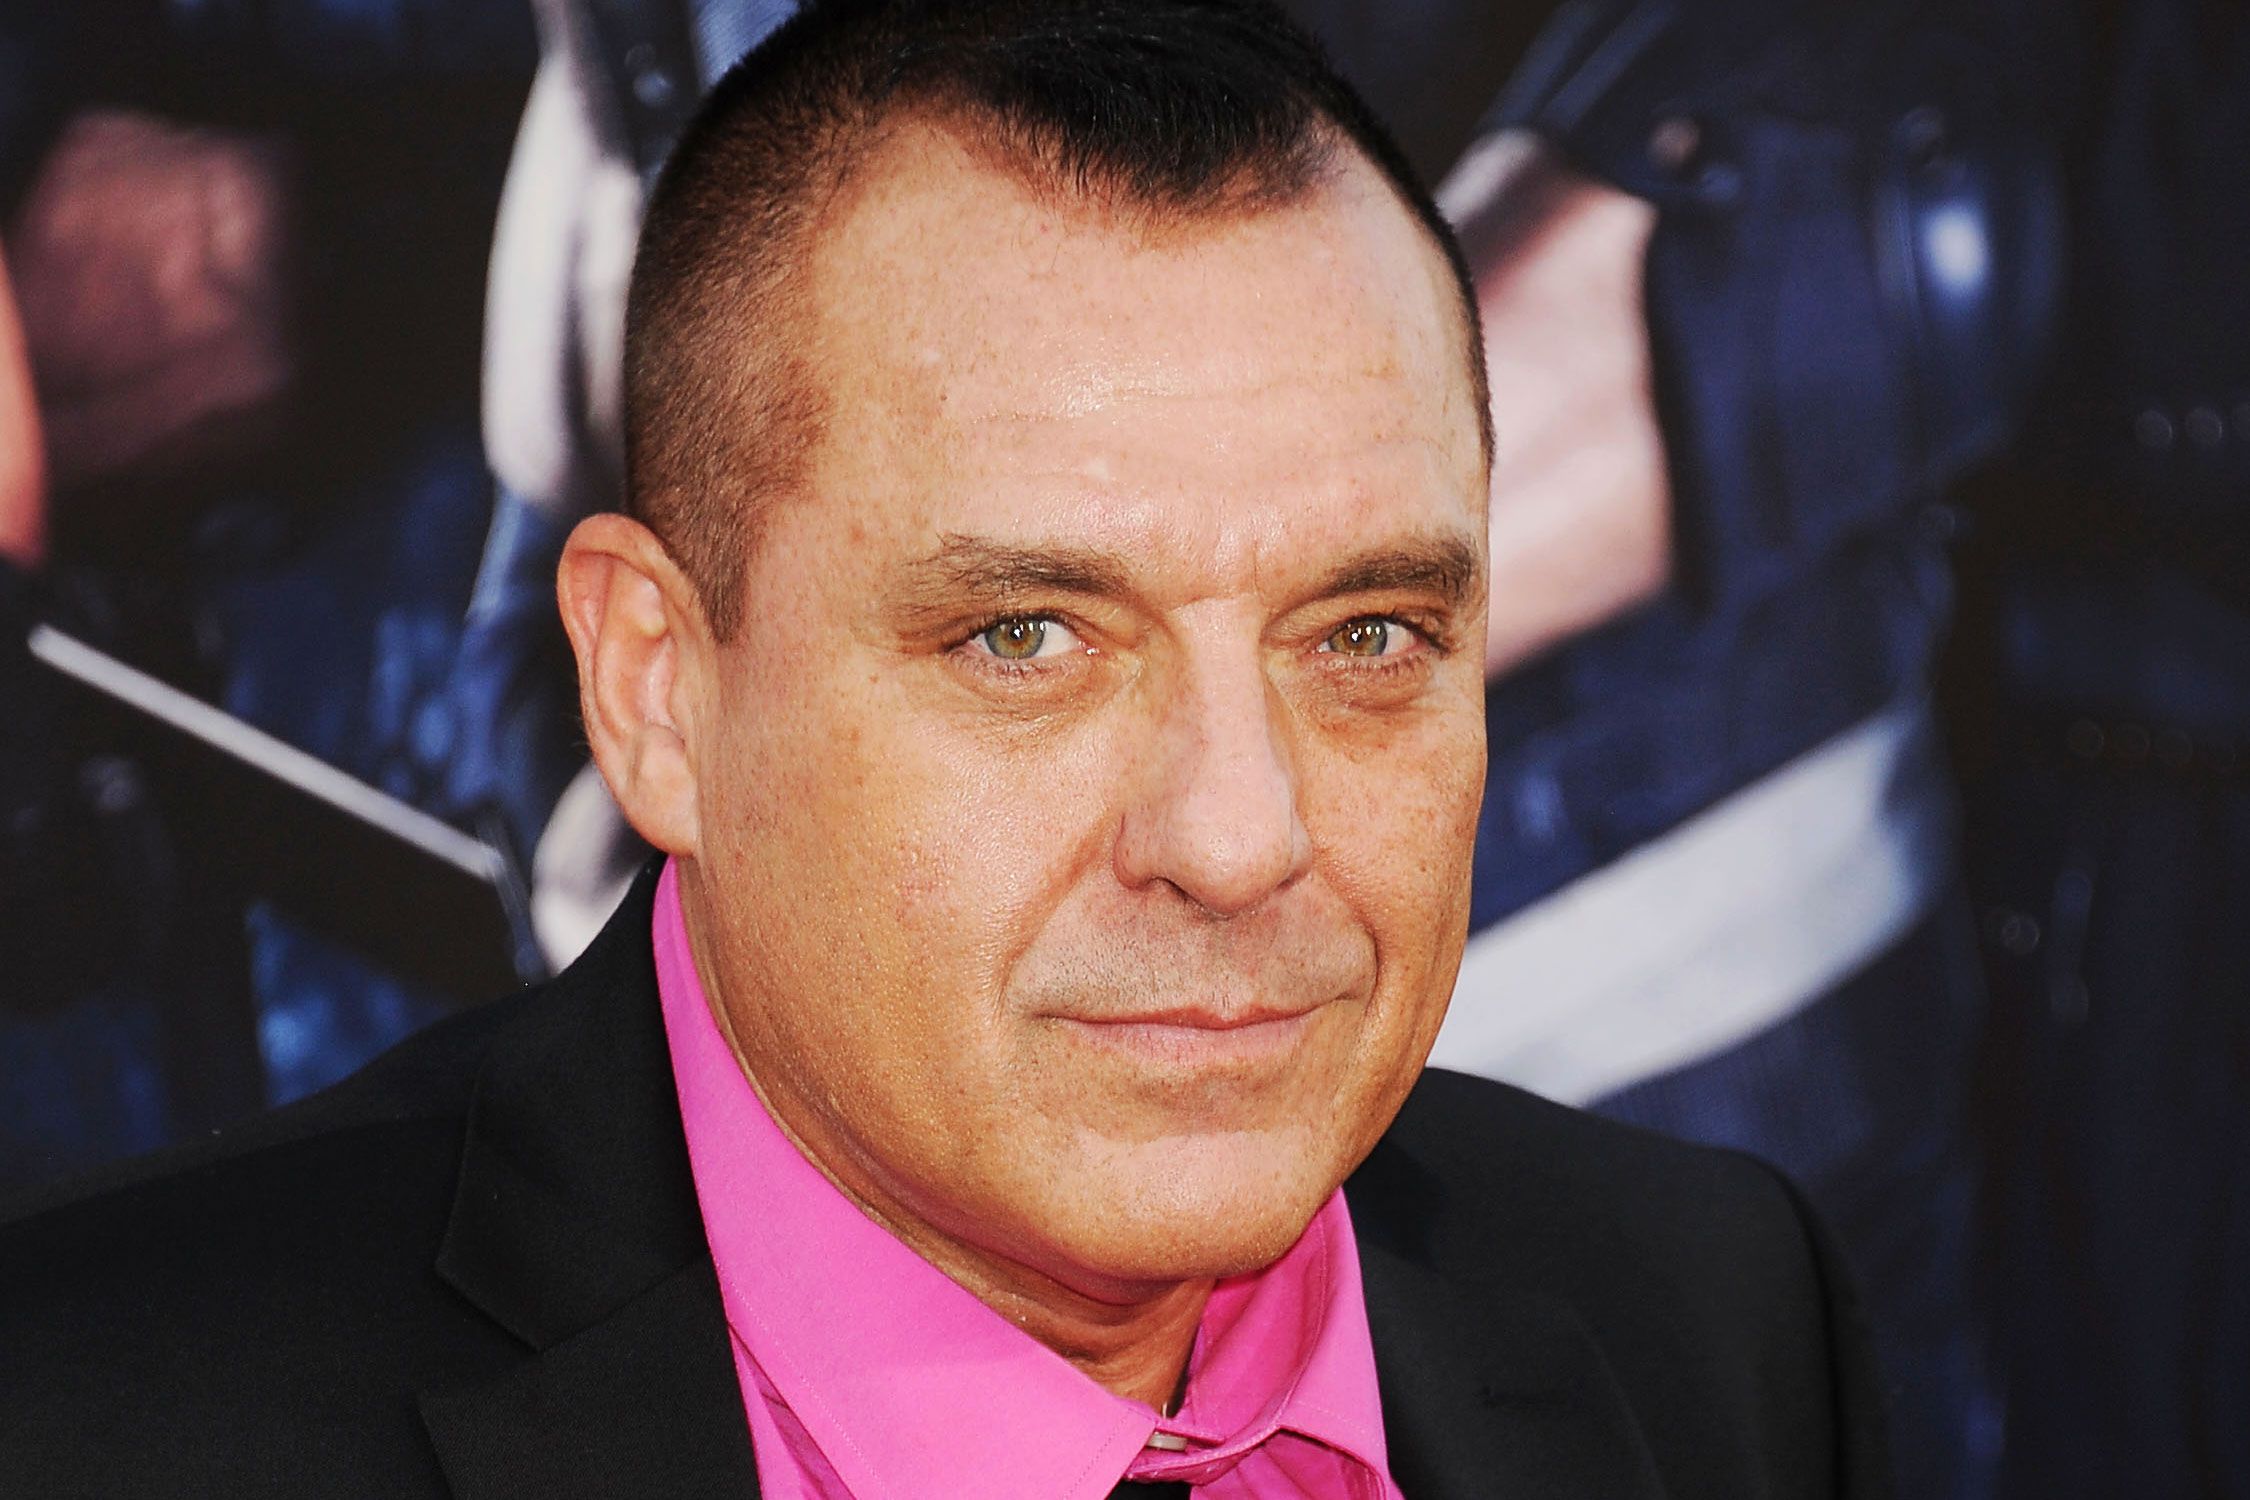 Tom Sizemore Made You Uncomfortable pic pic